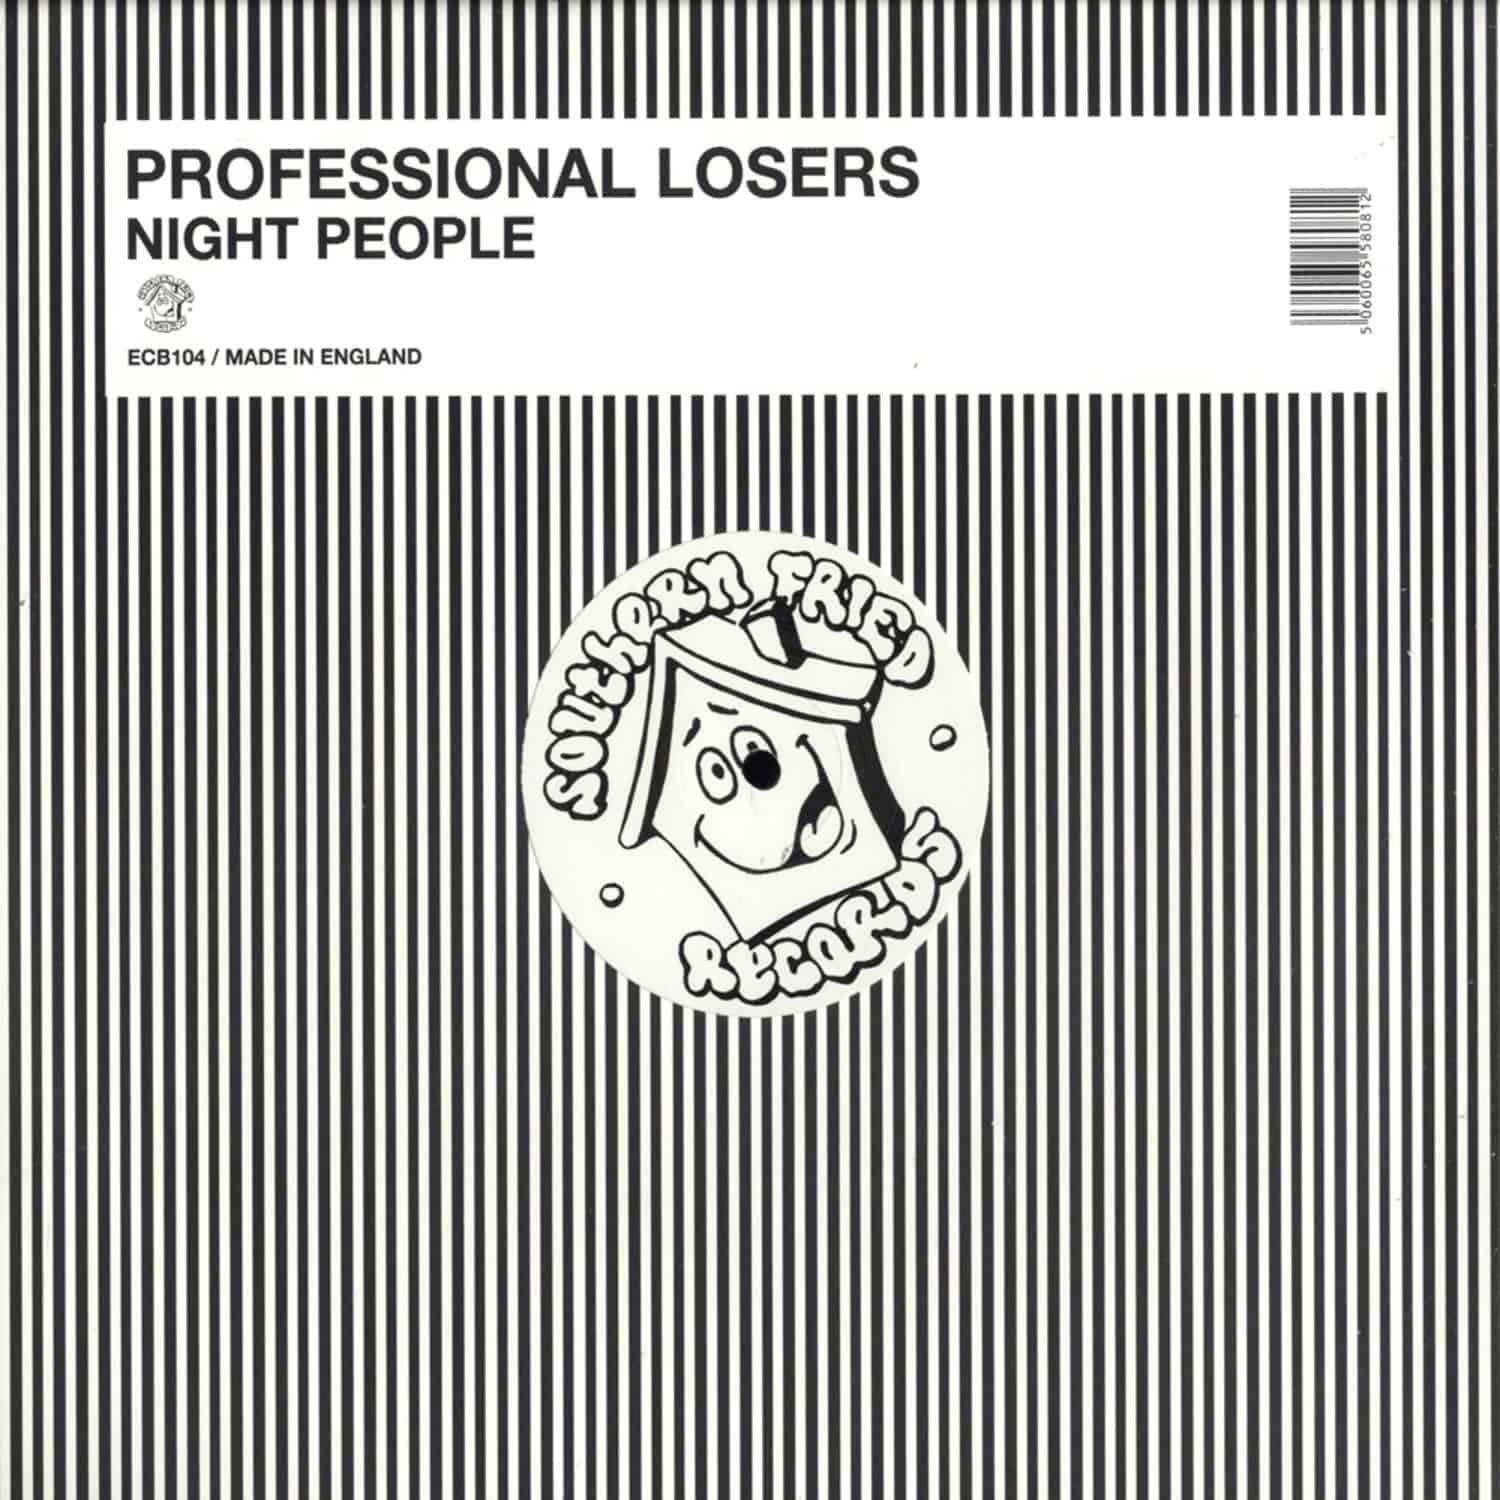 Professional Losers - NIGHT PEOPLE